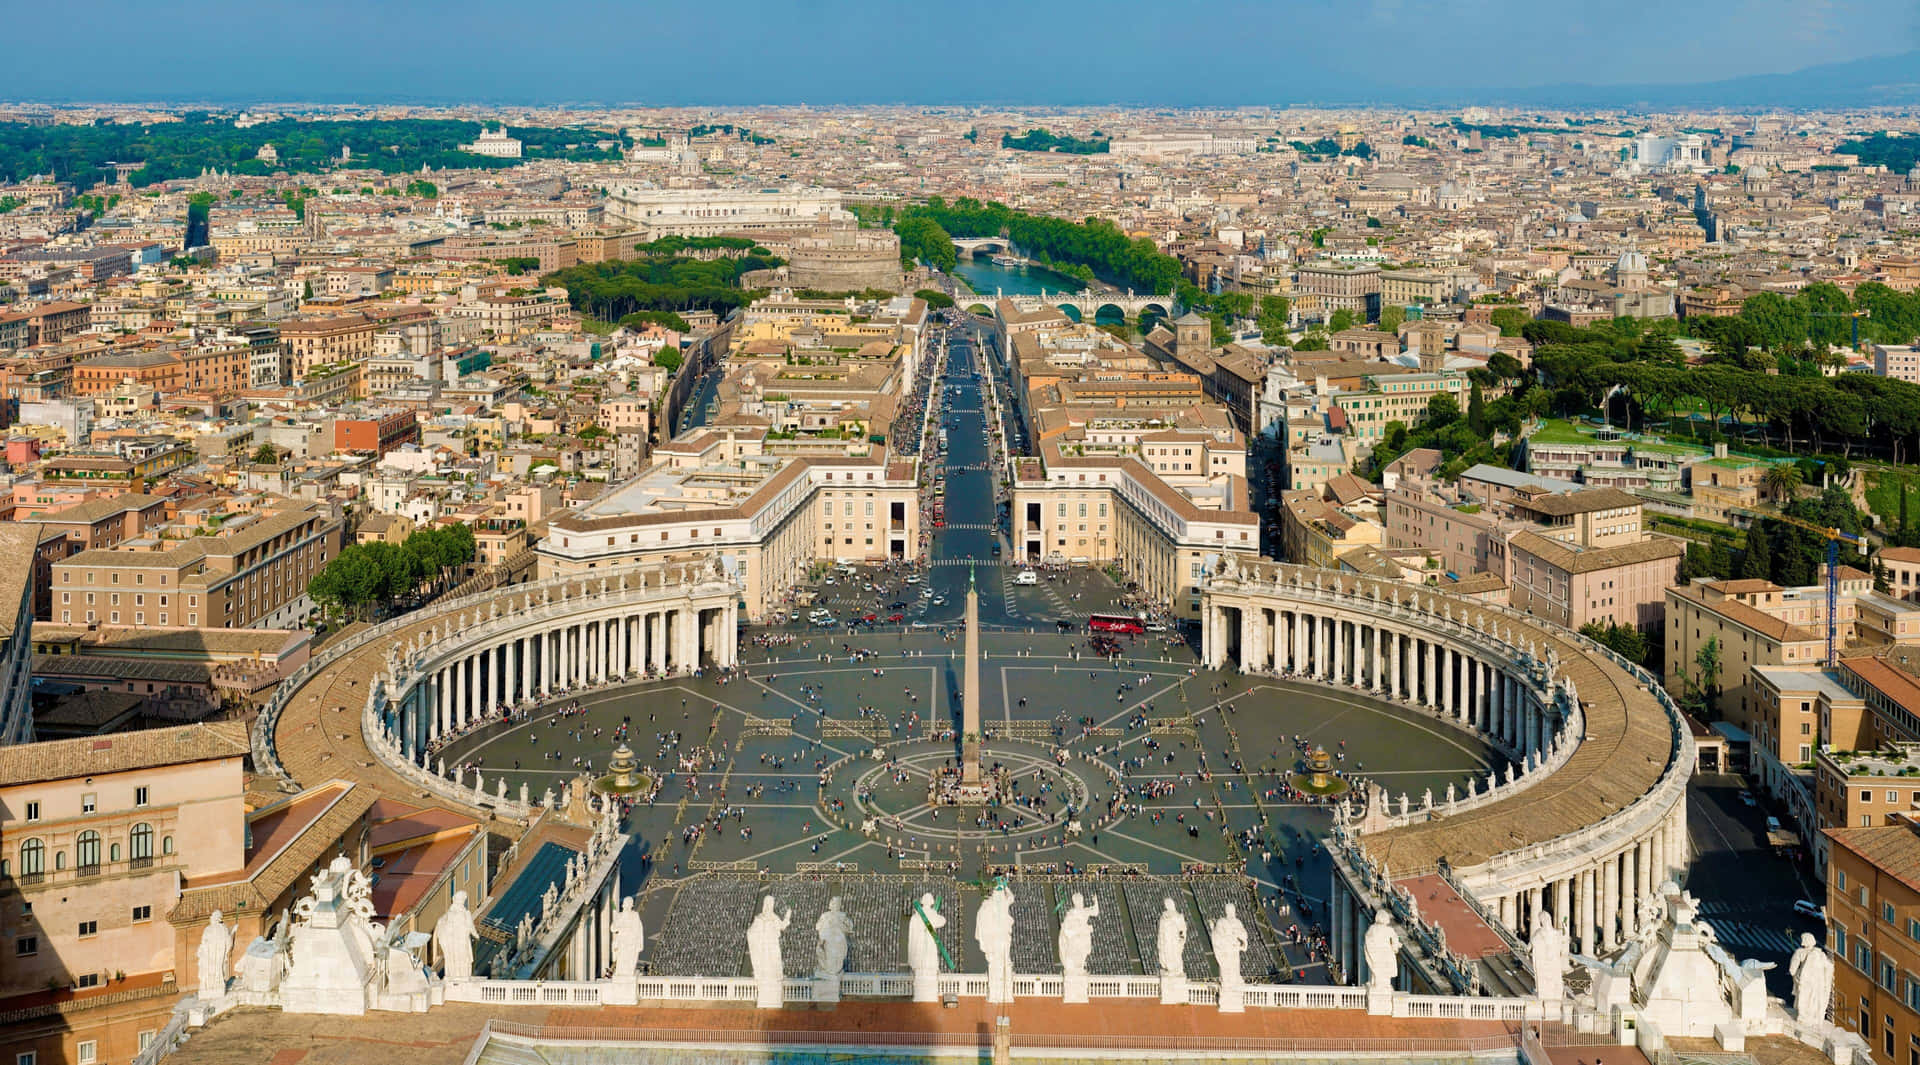 Majestic buildings of historic Rome